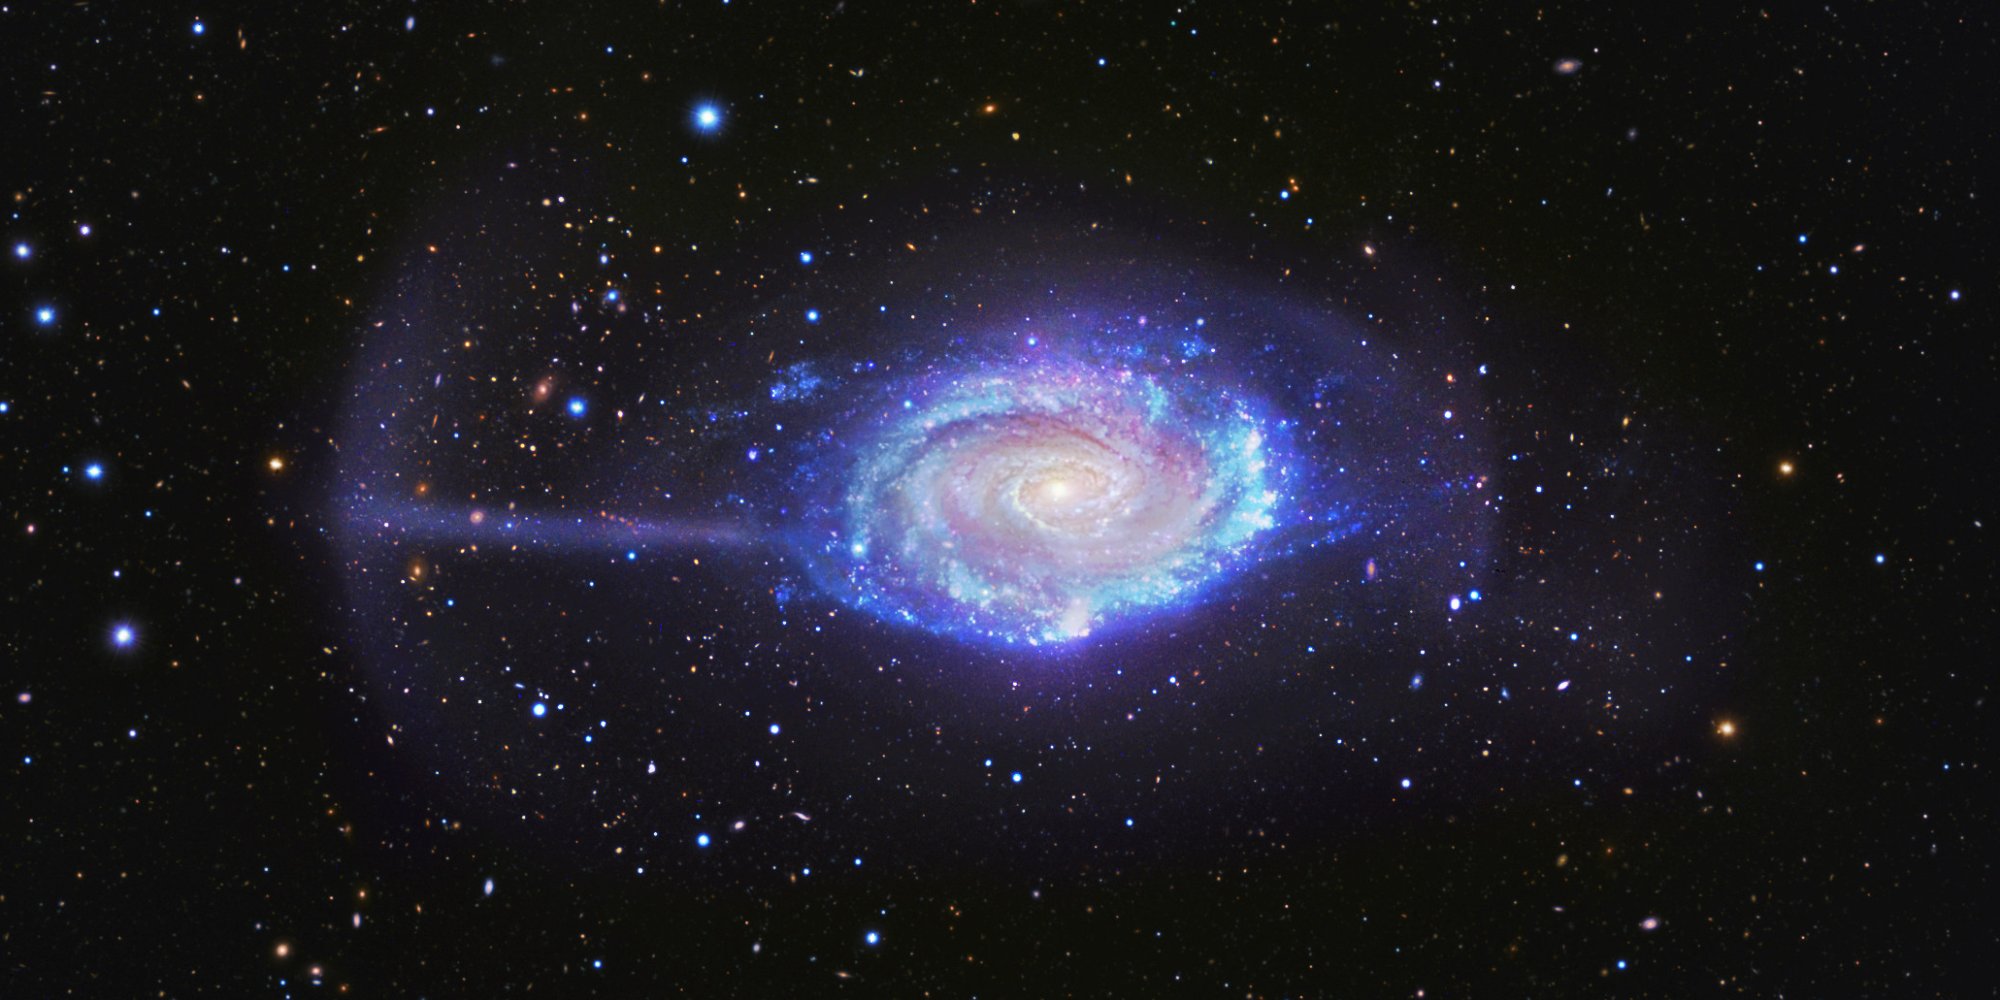 Long-lost sibling of the Milky Way shredded by cannibal galaxy